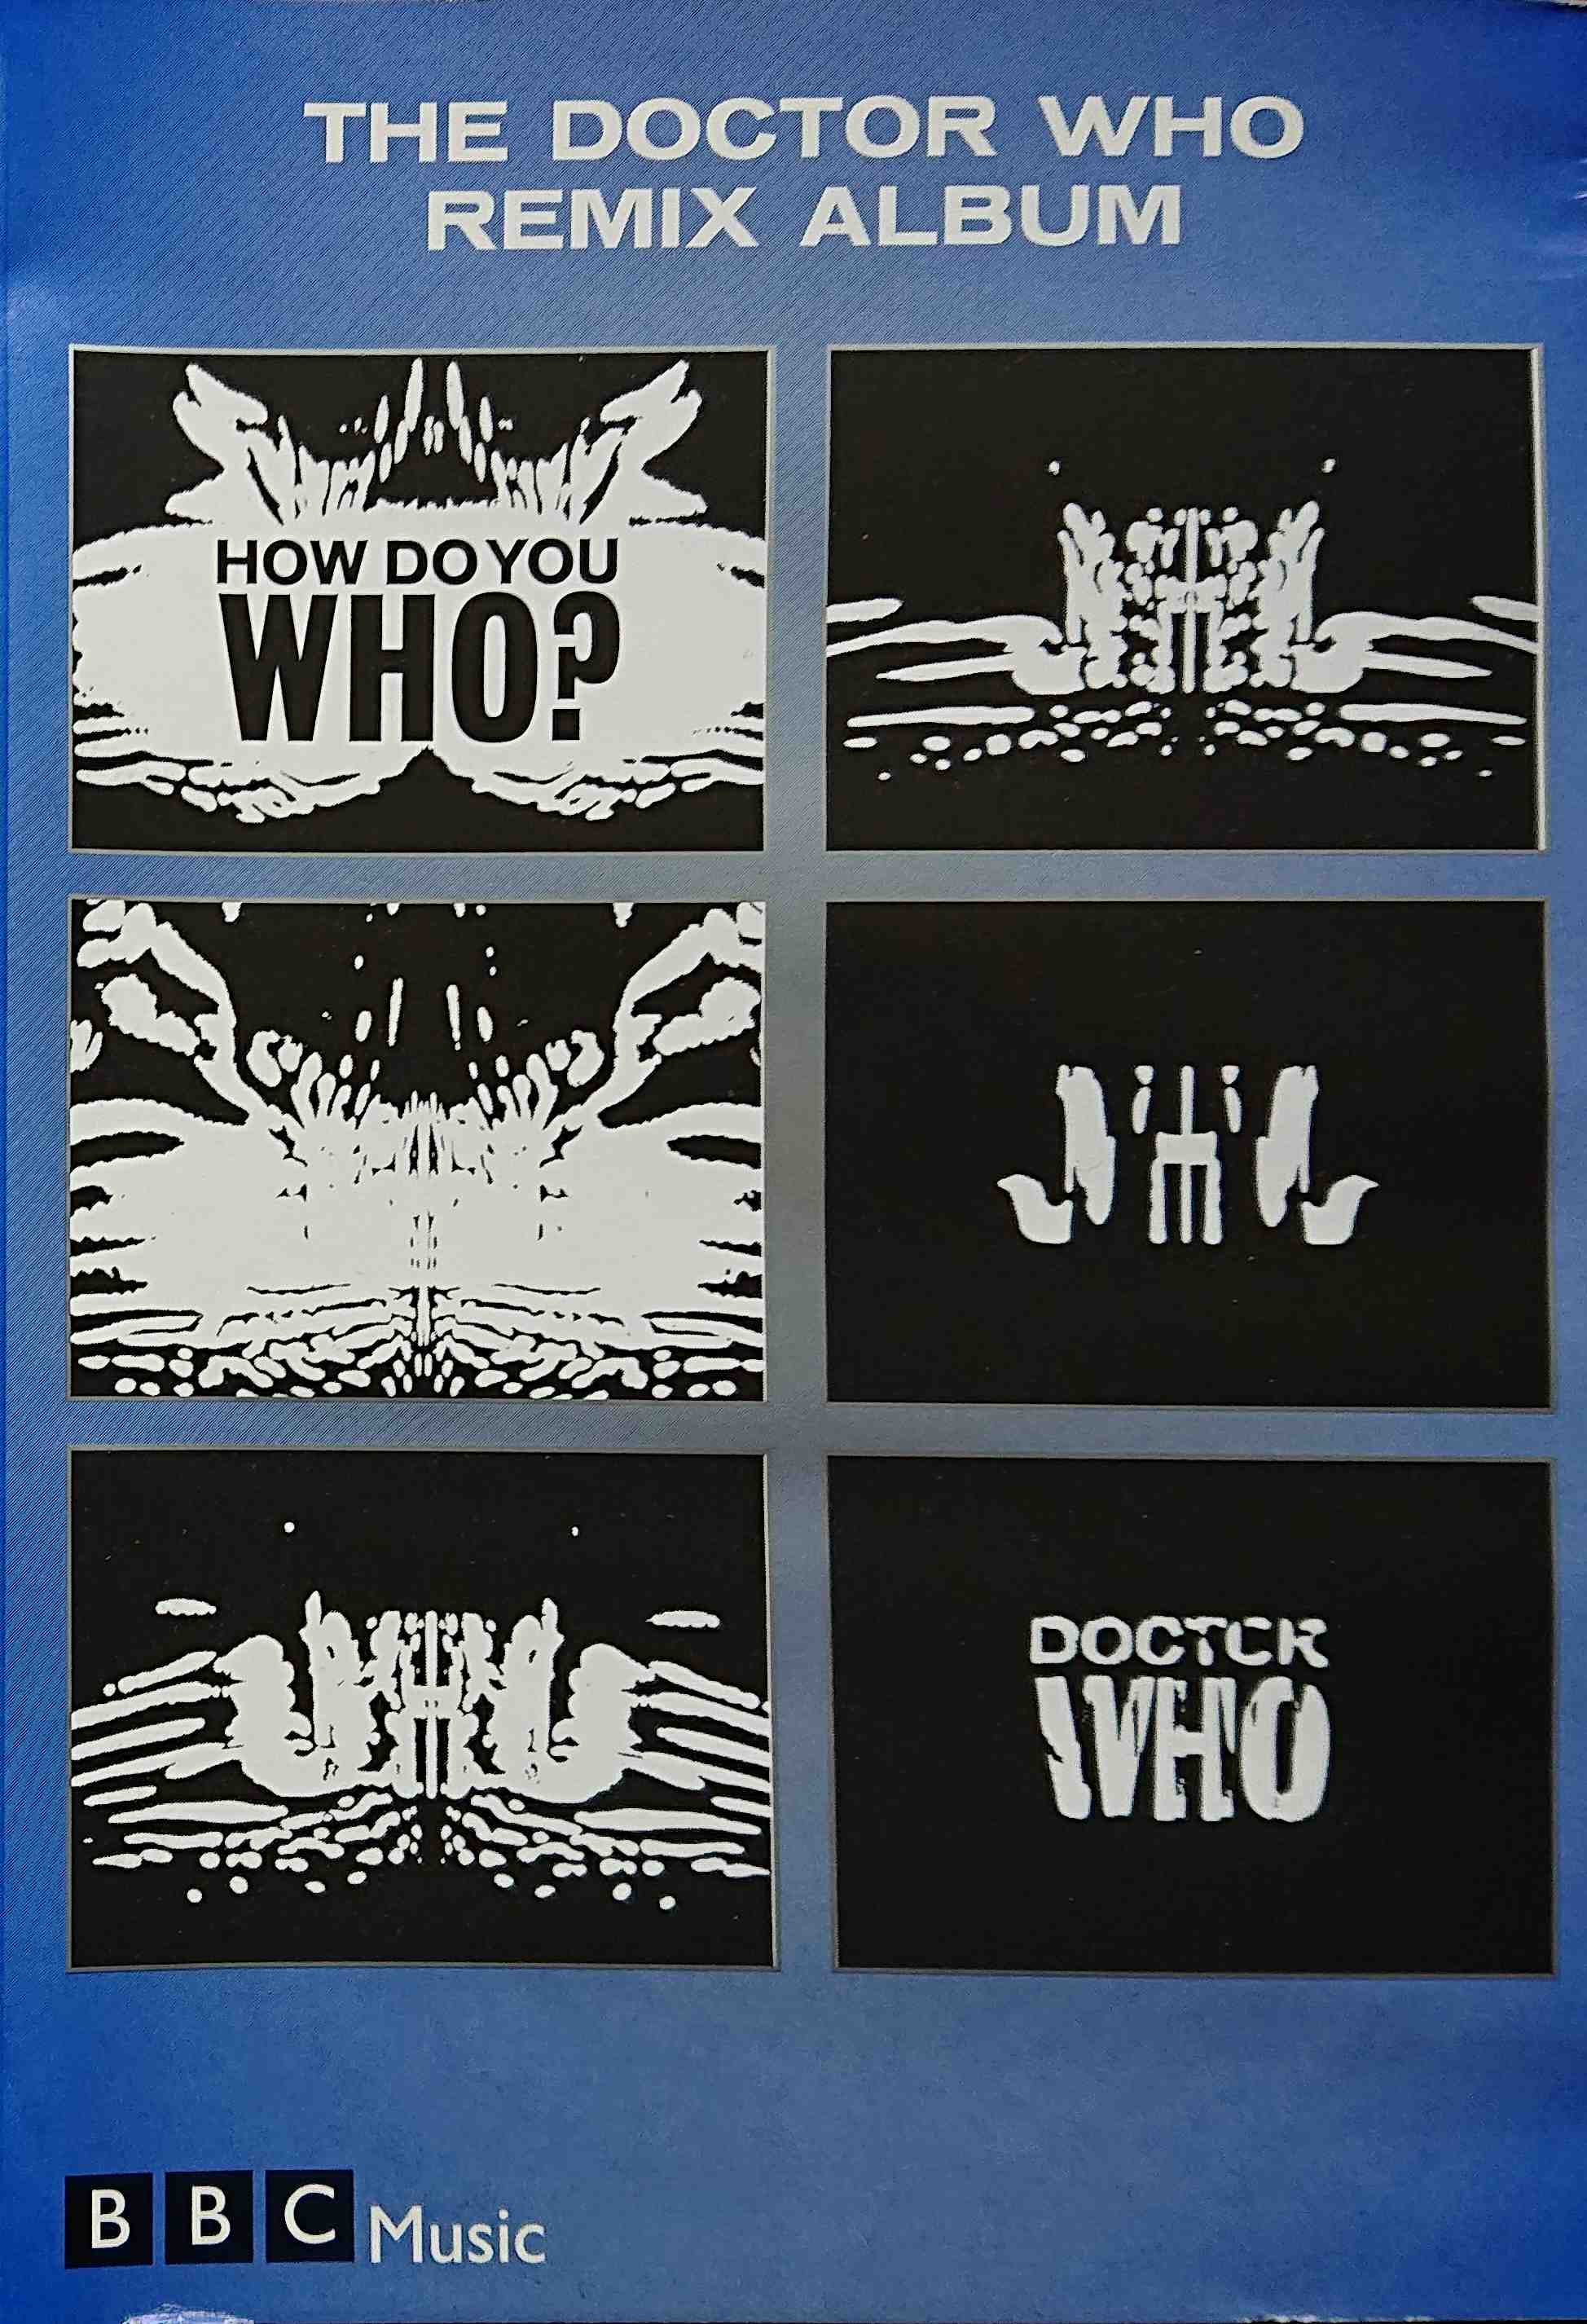 Picture of Doctor Who - The Doctor Who remix album by artist Various from the BBC dvds - Records and Tapes library